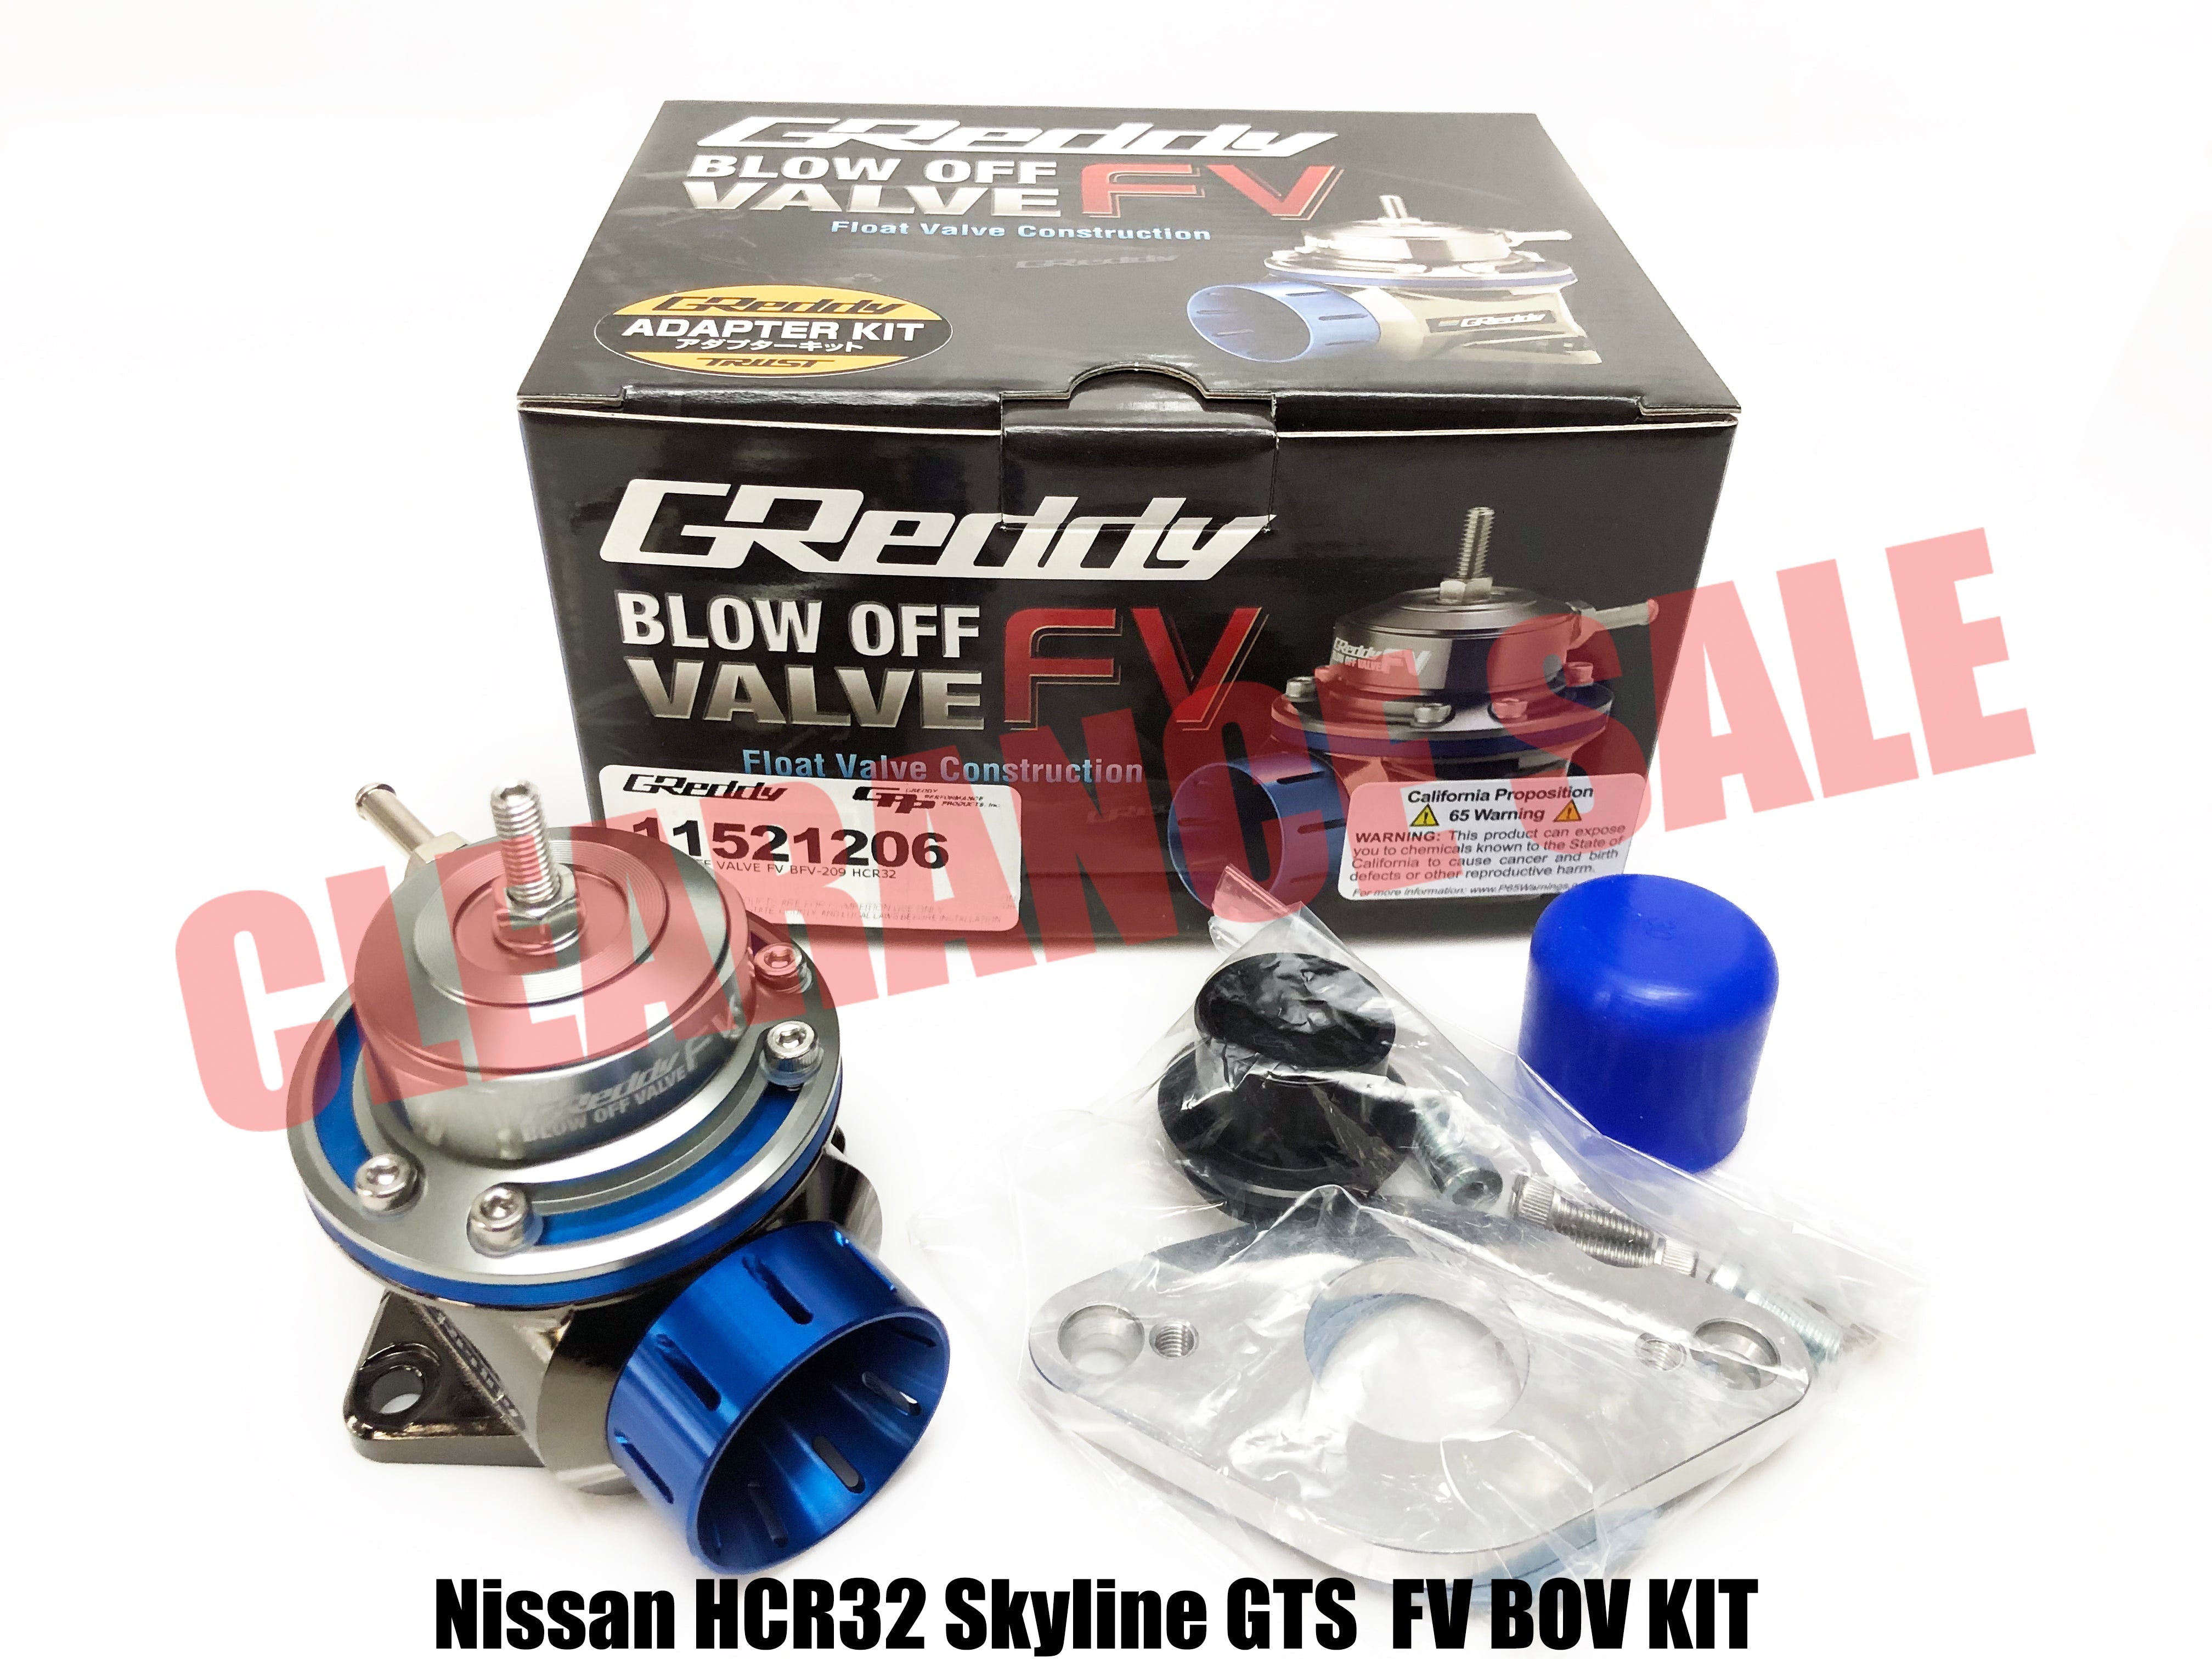 CLOSE OUT SALE - Original GReddy Type FV Blow Off Valve Adapter Sets - CLEARANCE